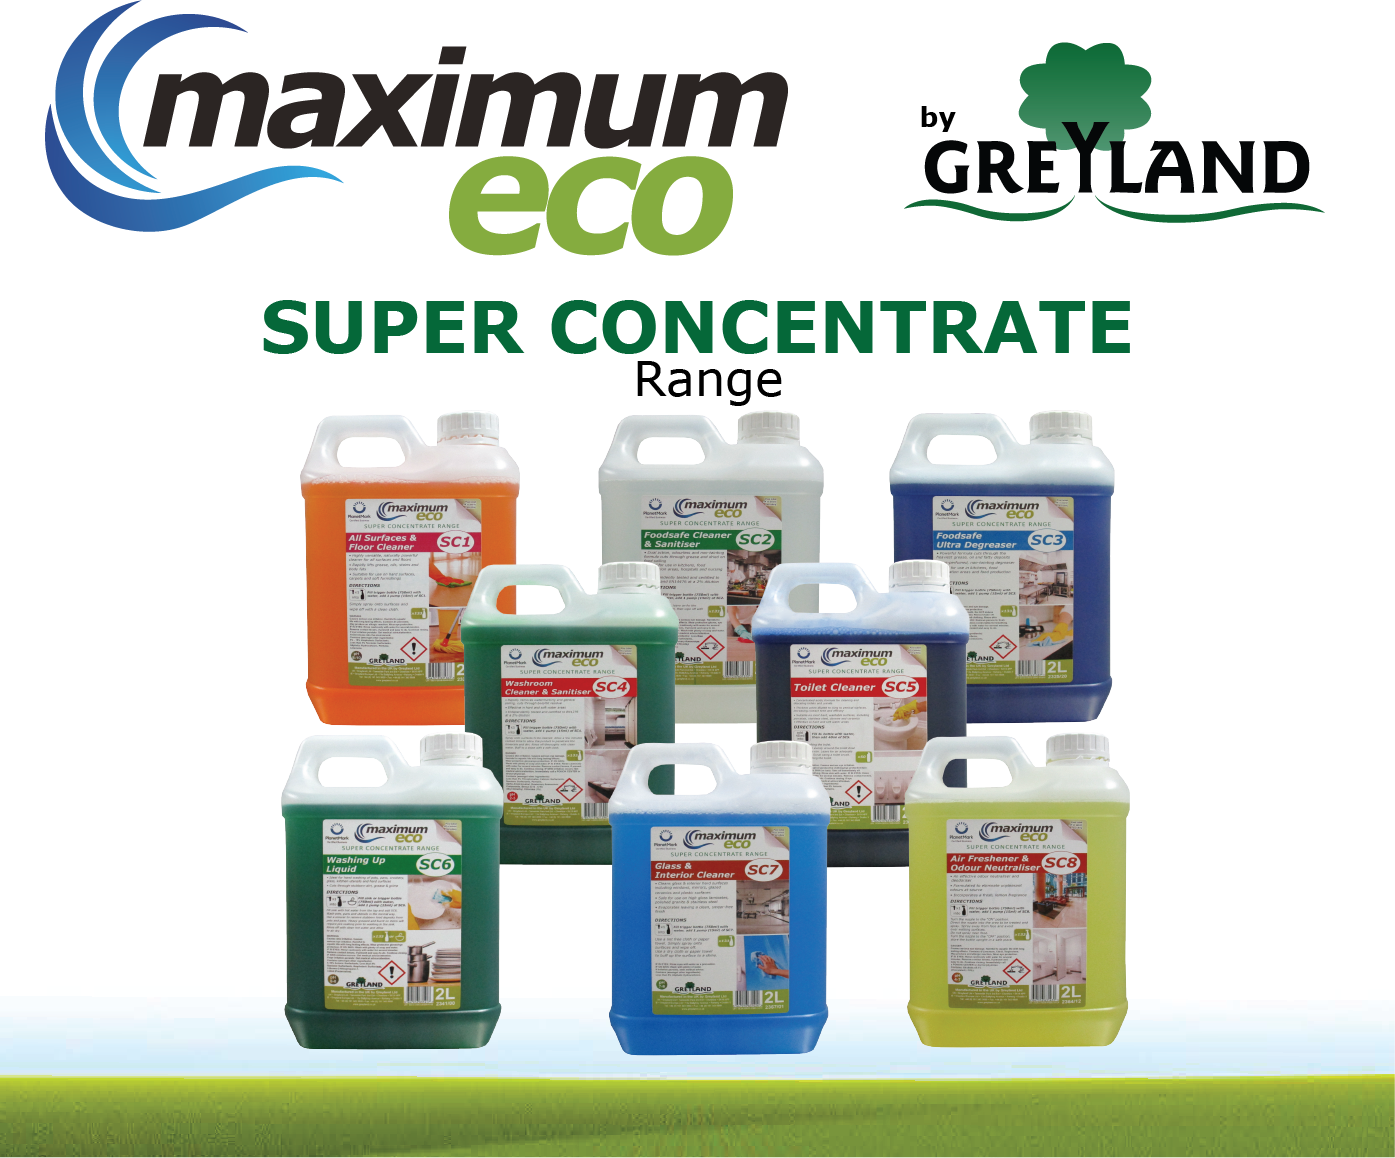 Introducing our new Super Concentrate range! 